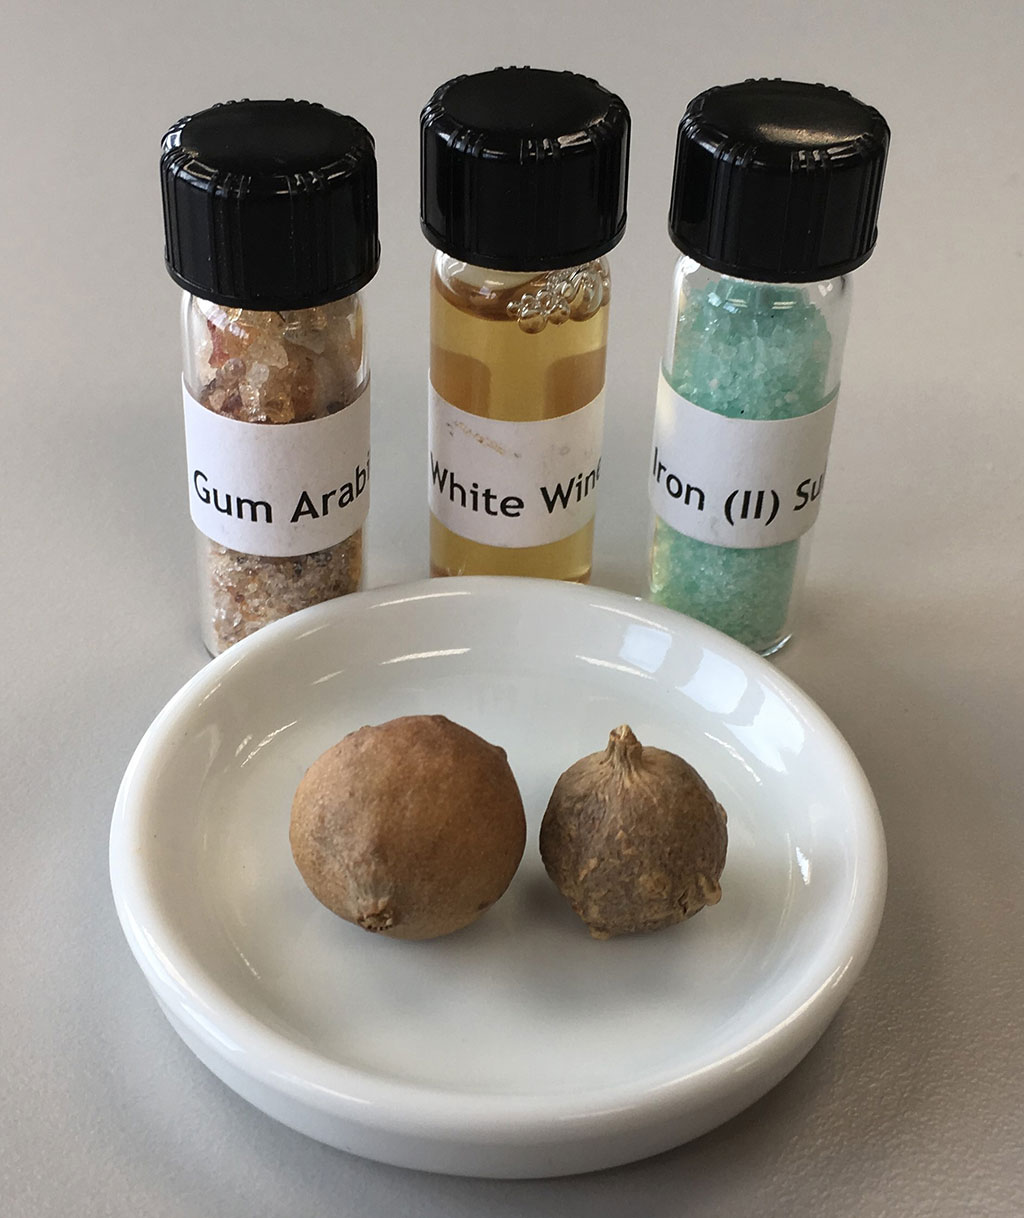 Materials for the creation of Iron Gall Ink: tree galls, gum arabic, white wine, and green vitriol [Iron (II) sulfate]